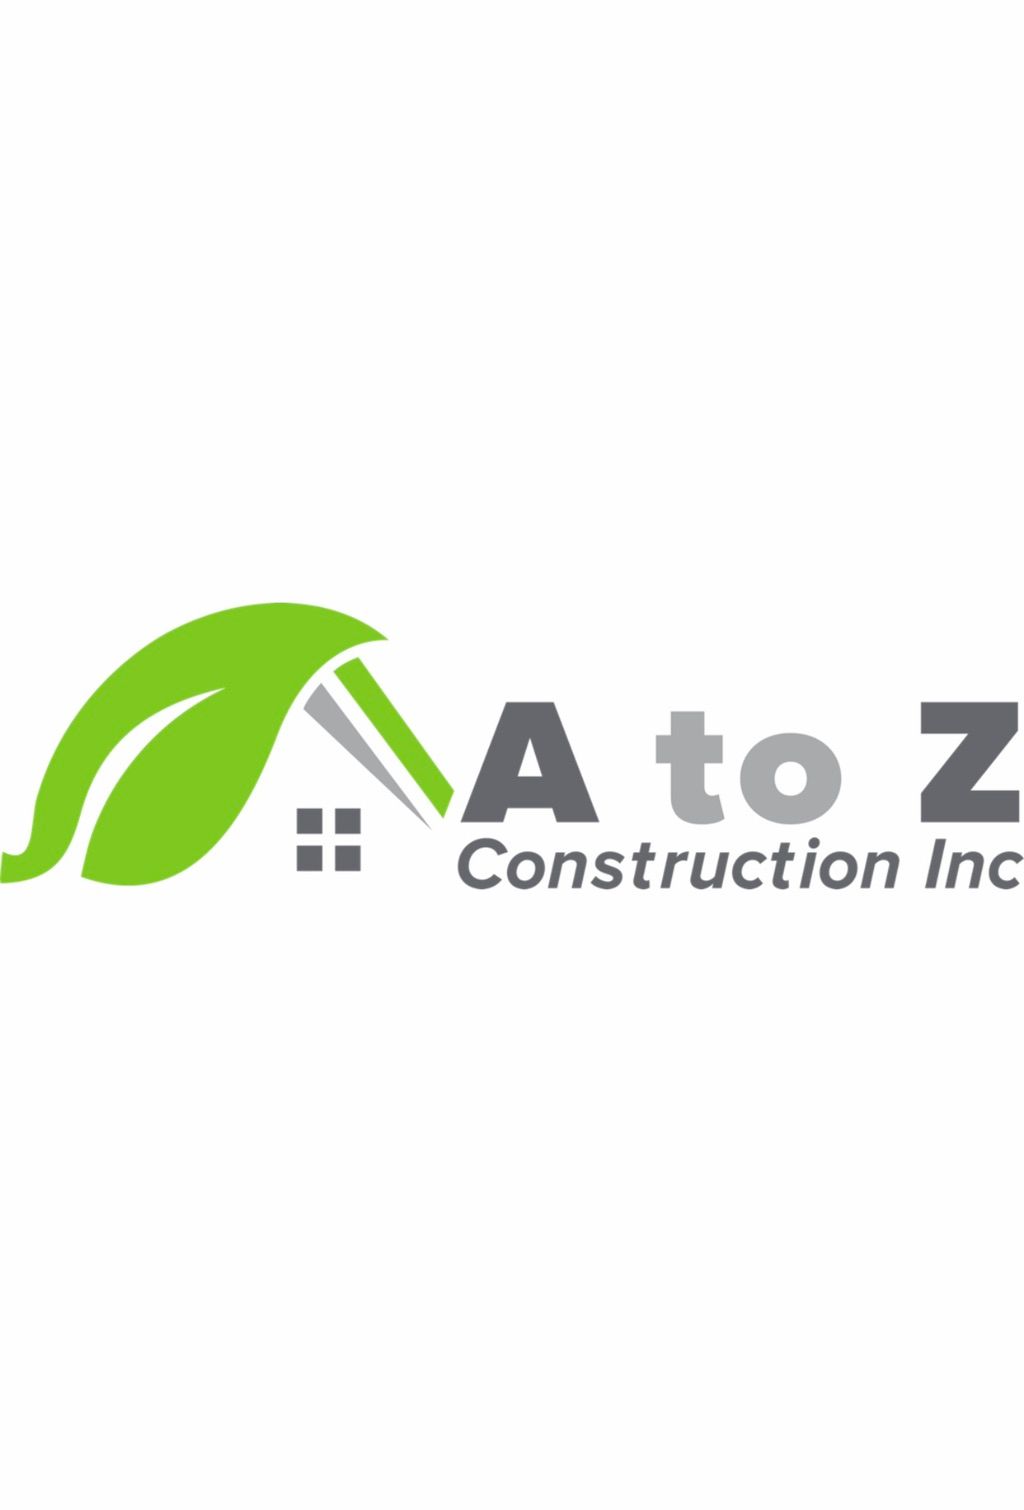 A to Z Construction Inc.